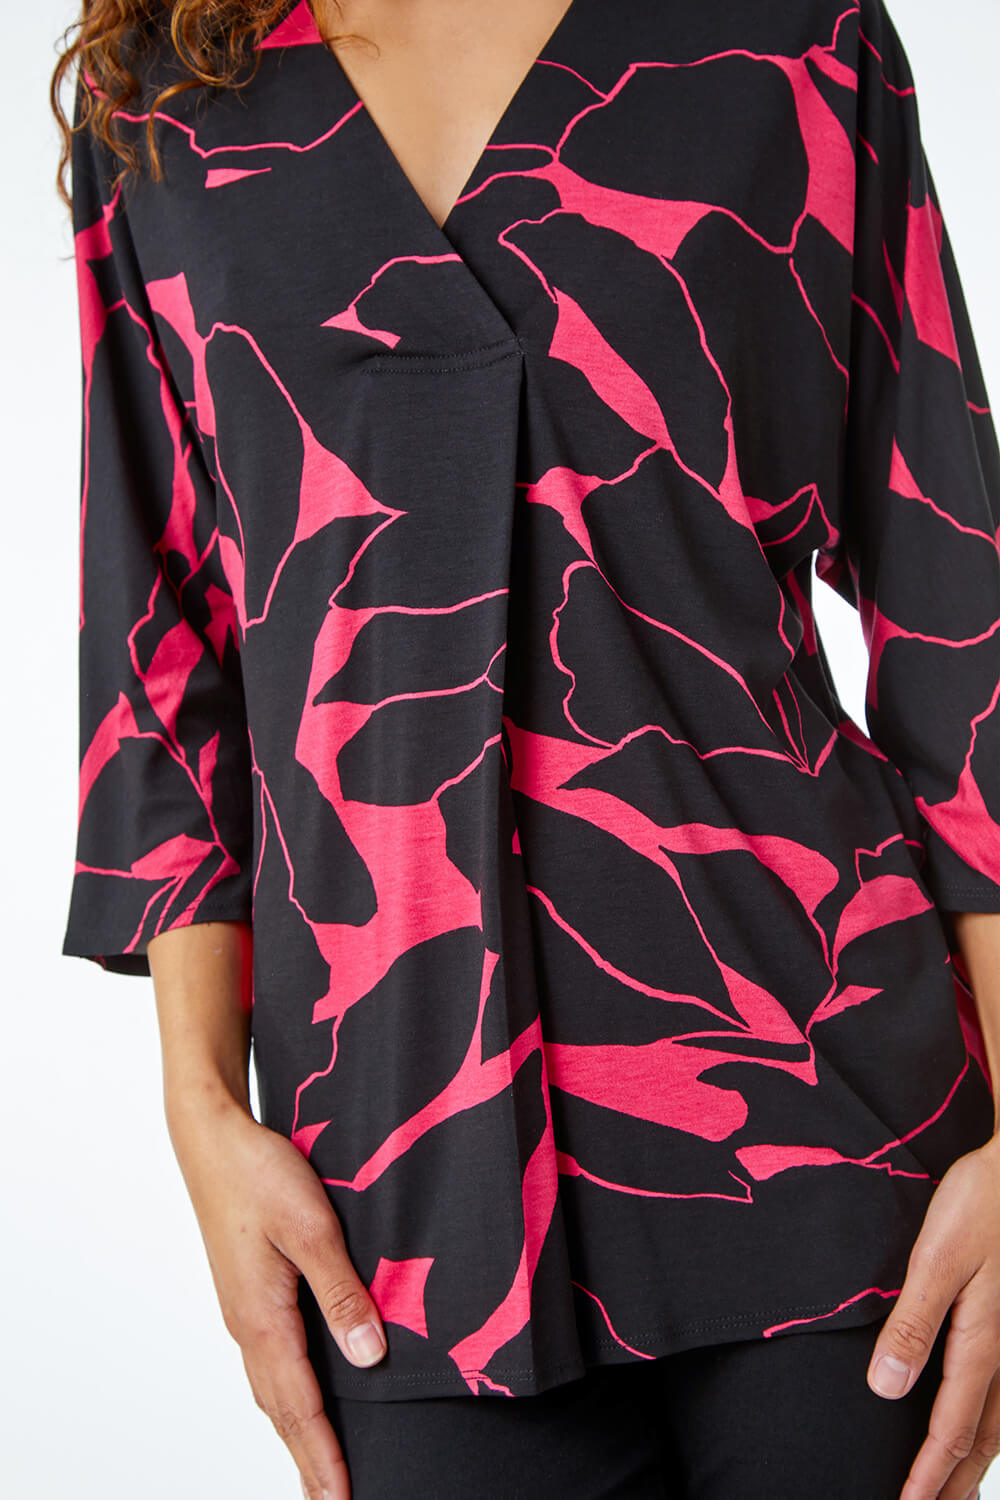 CERISE Floral Print Pleat Front Top, Image 5 of 5